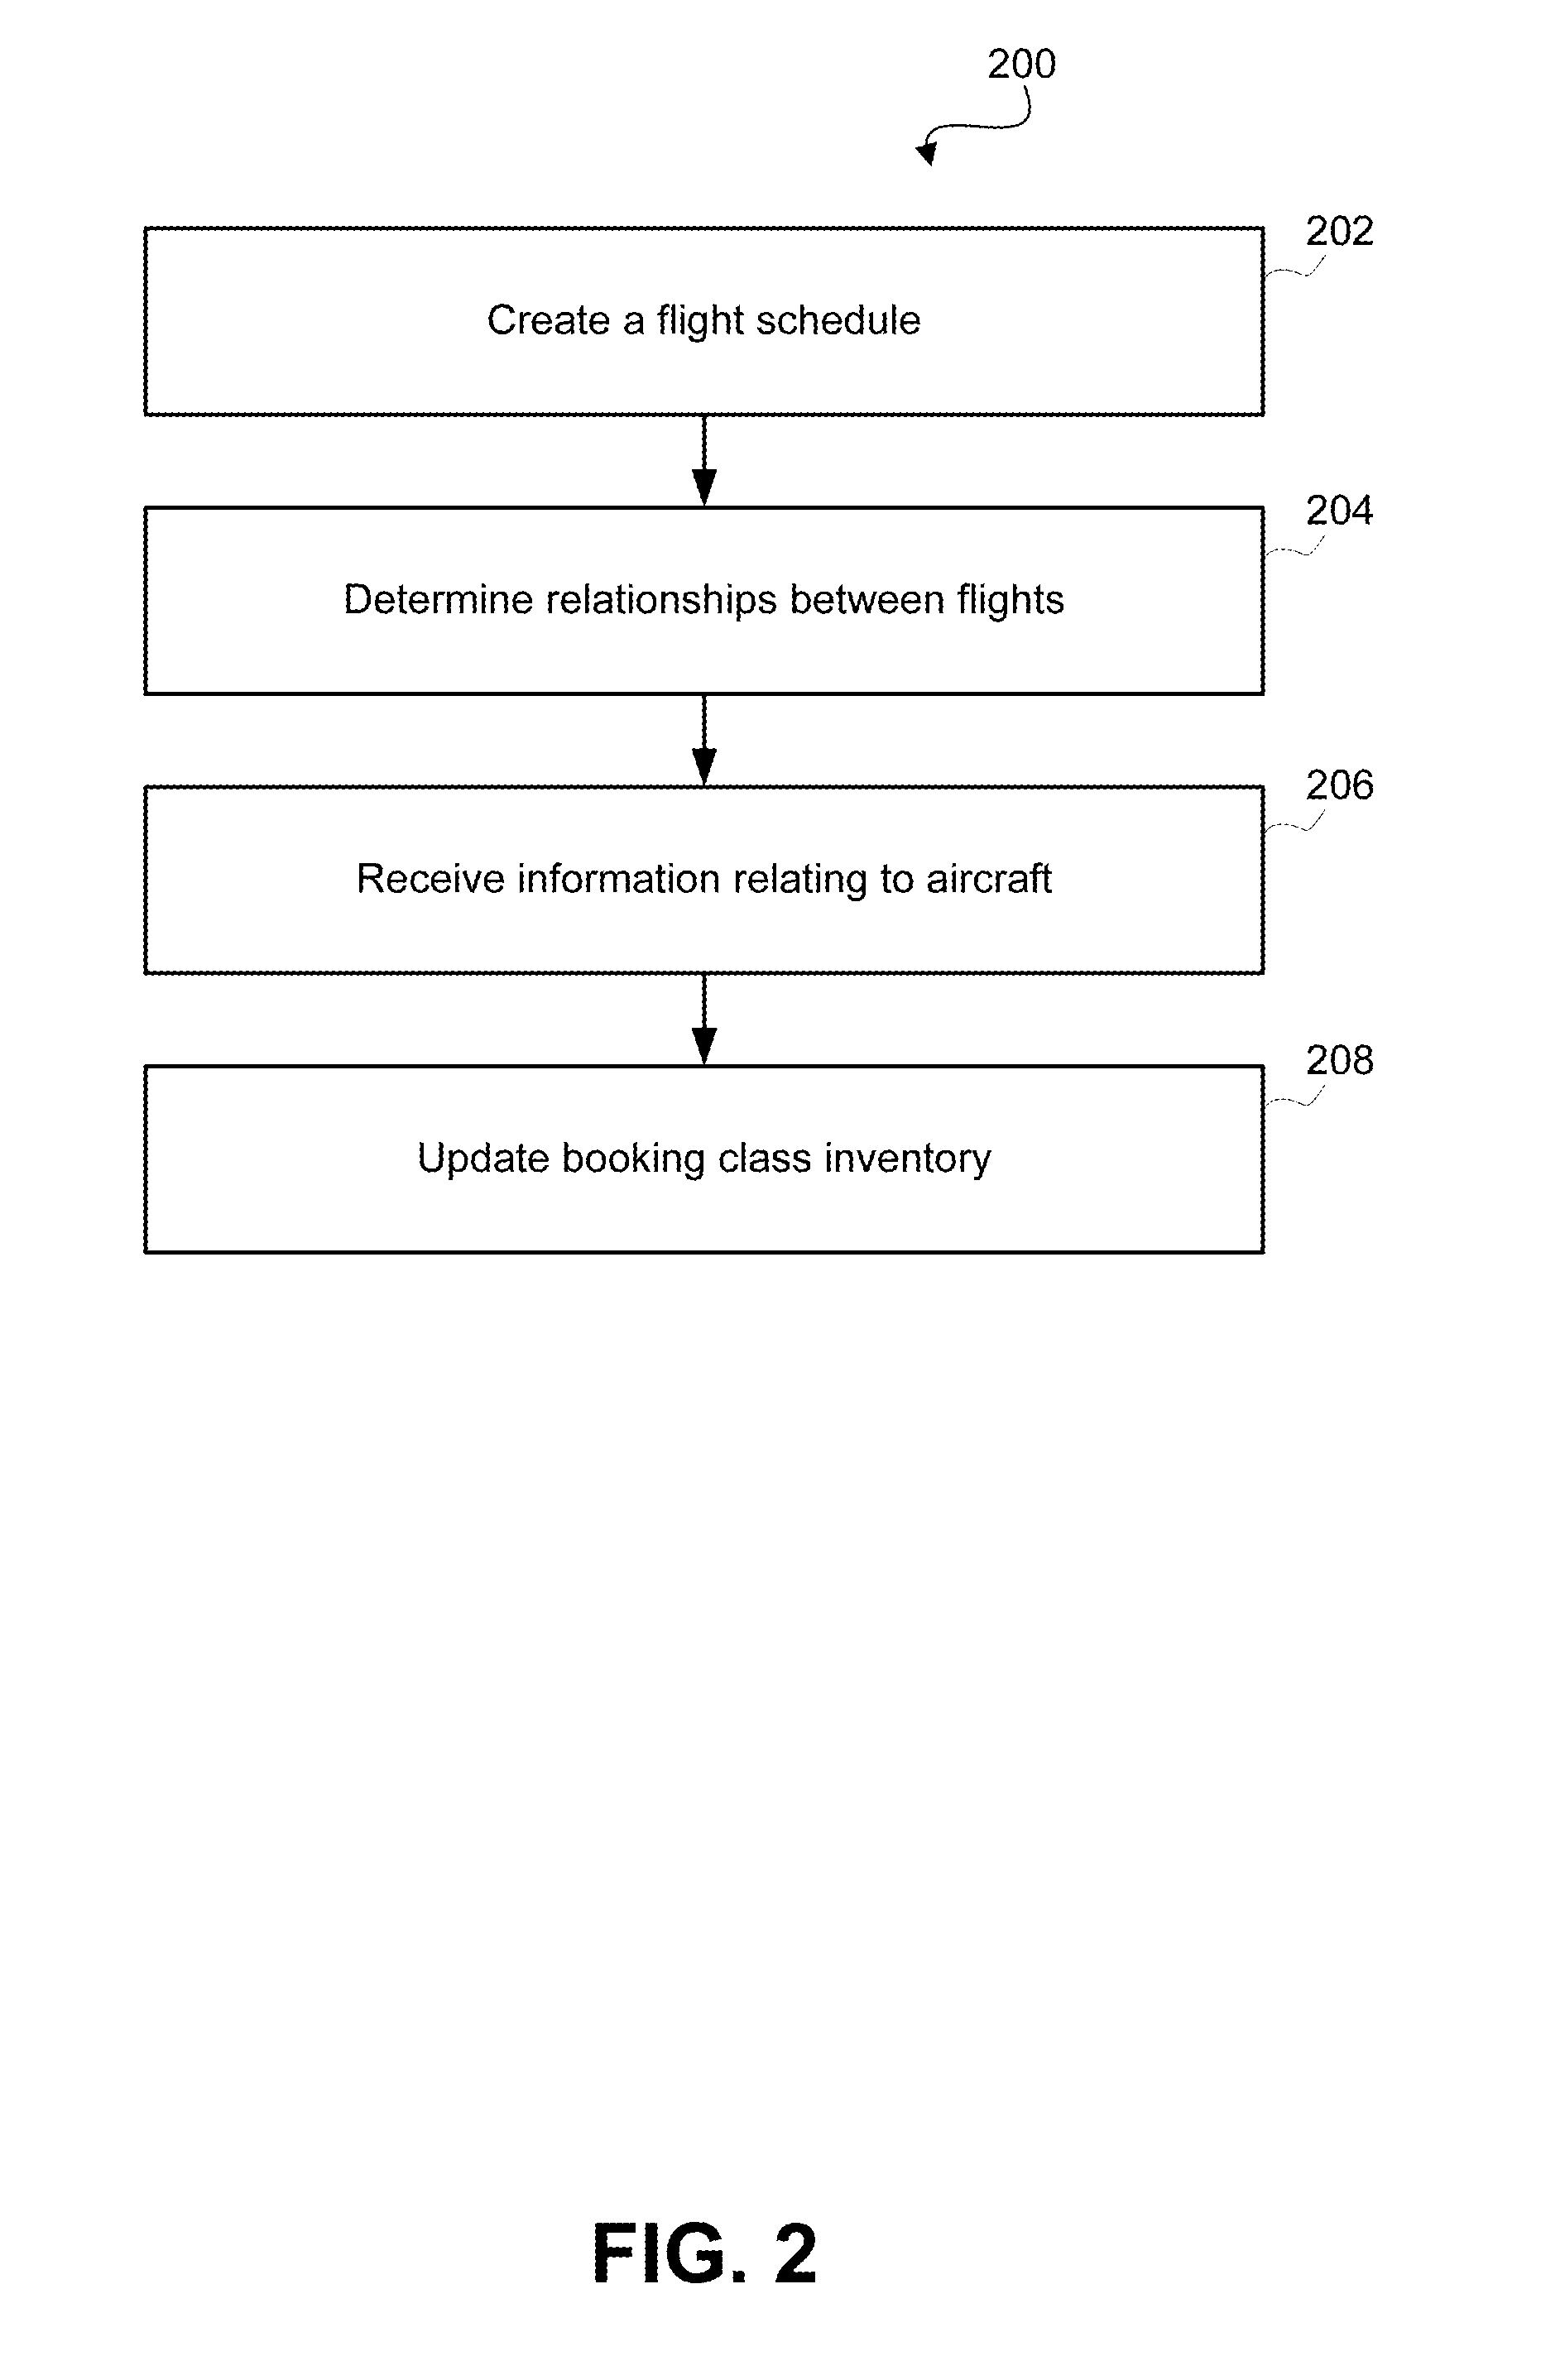 Systems, methods, and machine-readable storage media for interfacing with a computer flight system